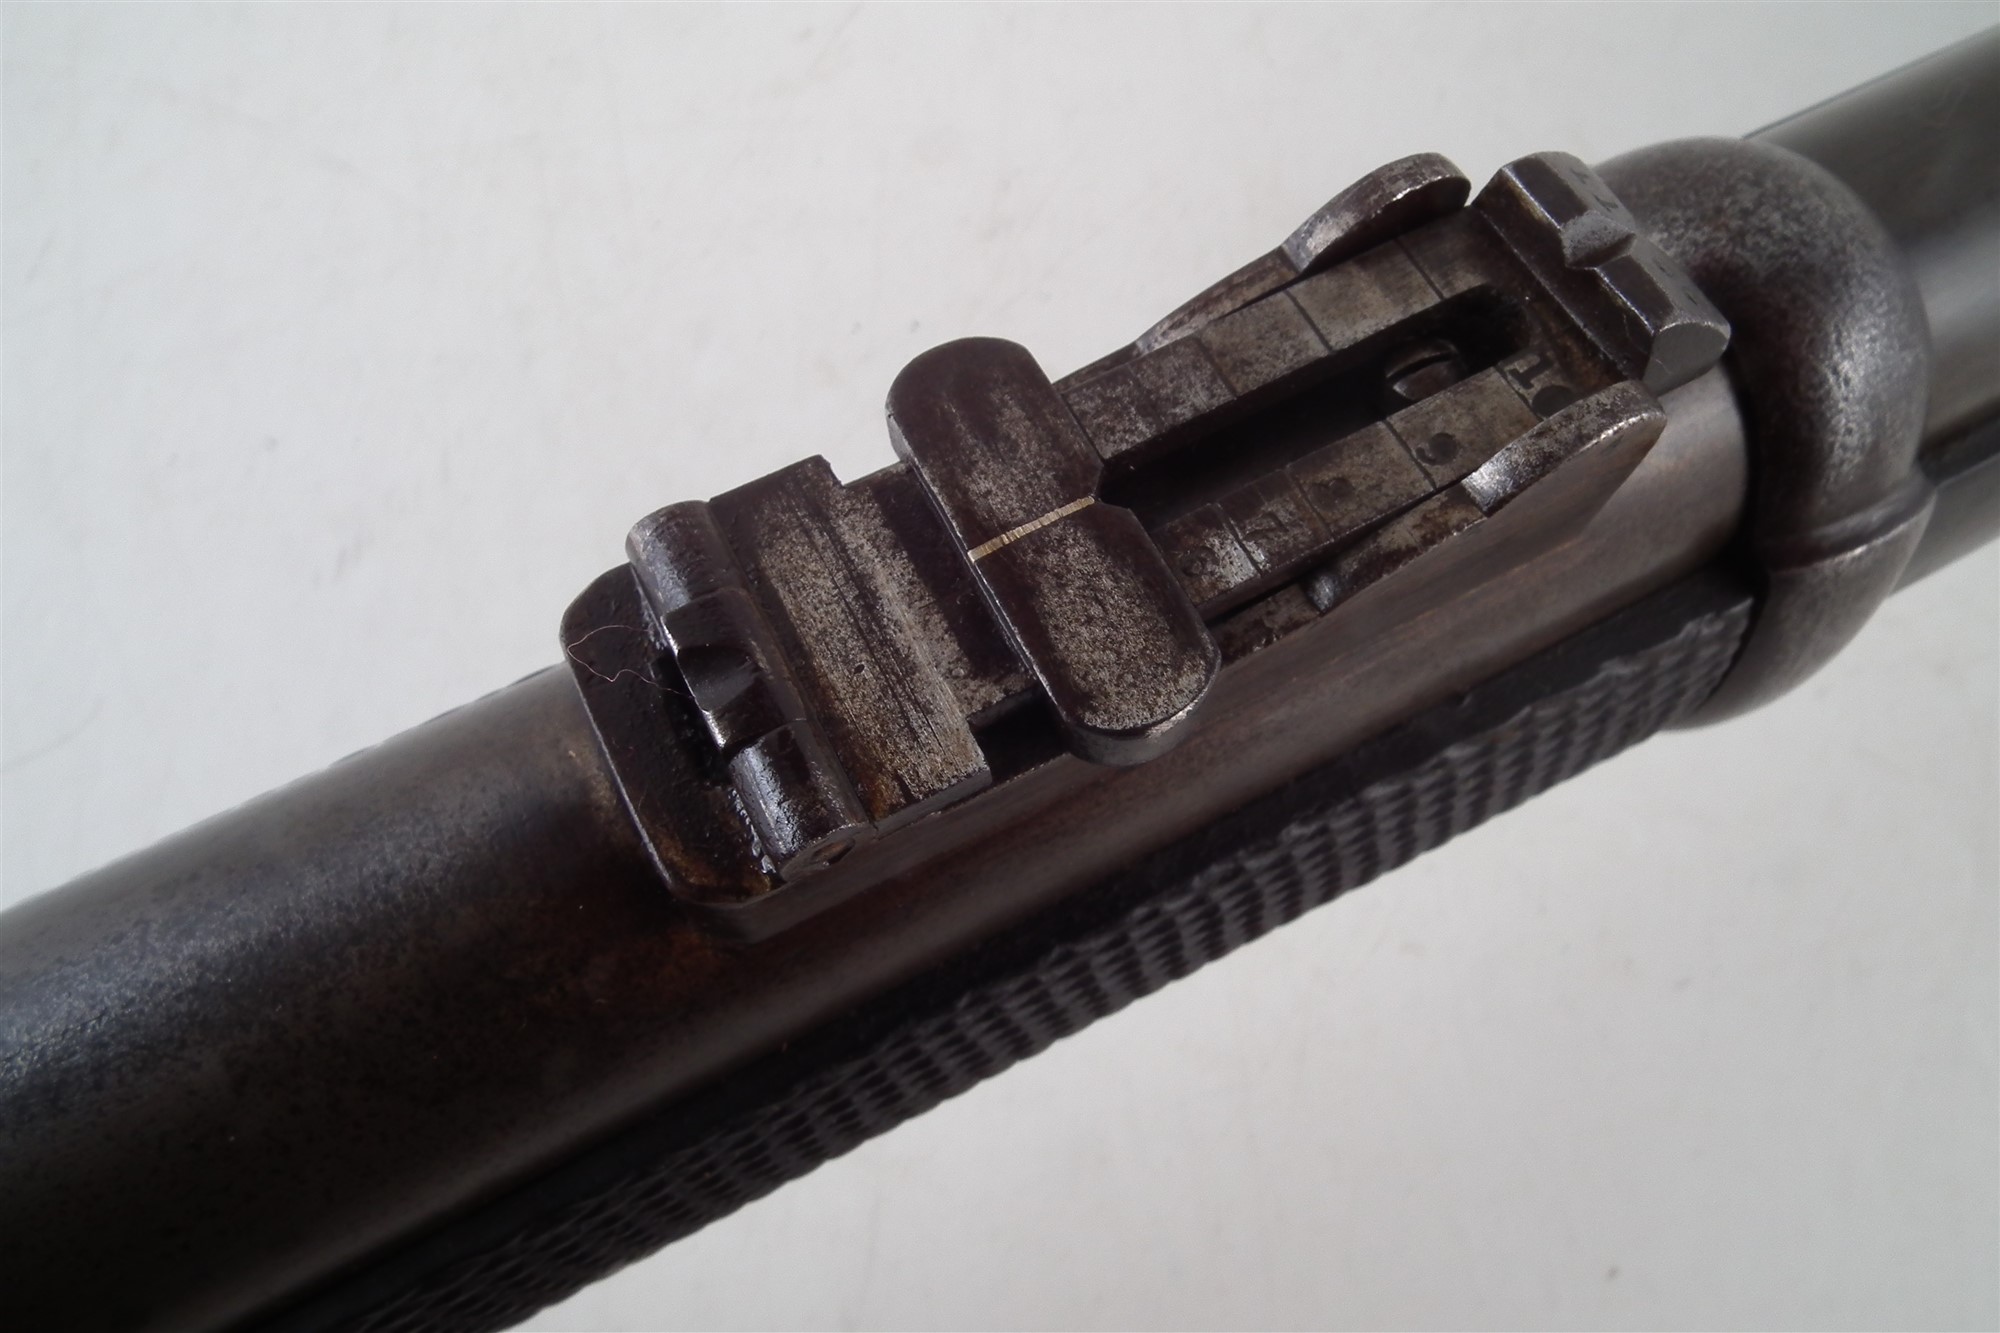 J. Aston Hythe percussion P53 pattern .577 rifle , with chequered stock and iron furniture - Image 5 of 9